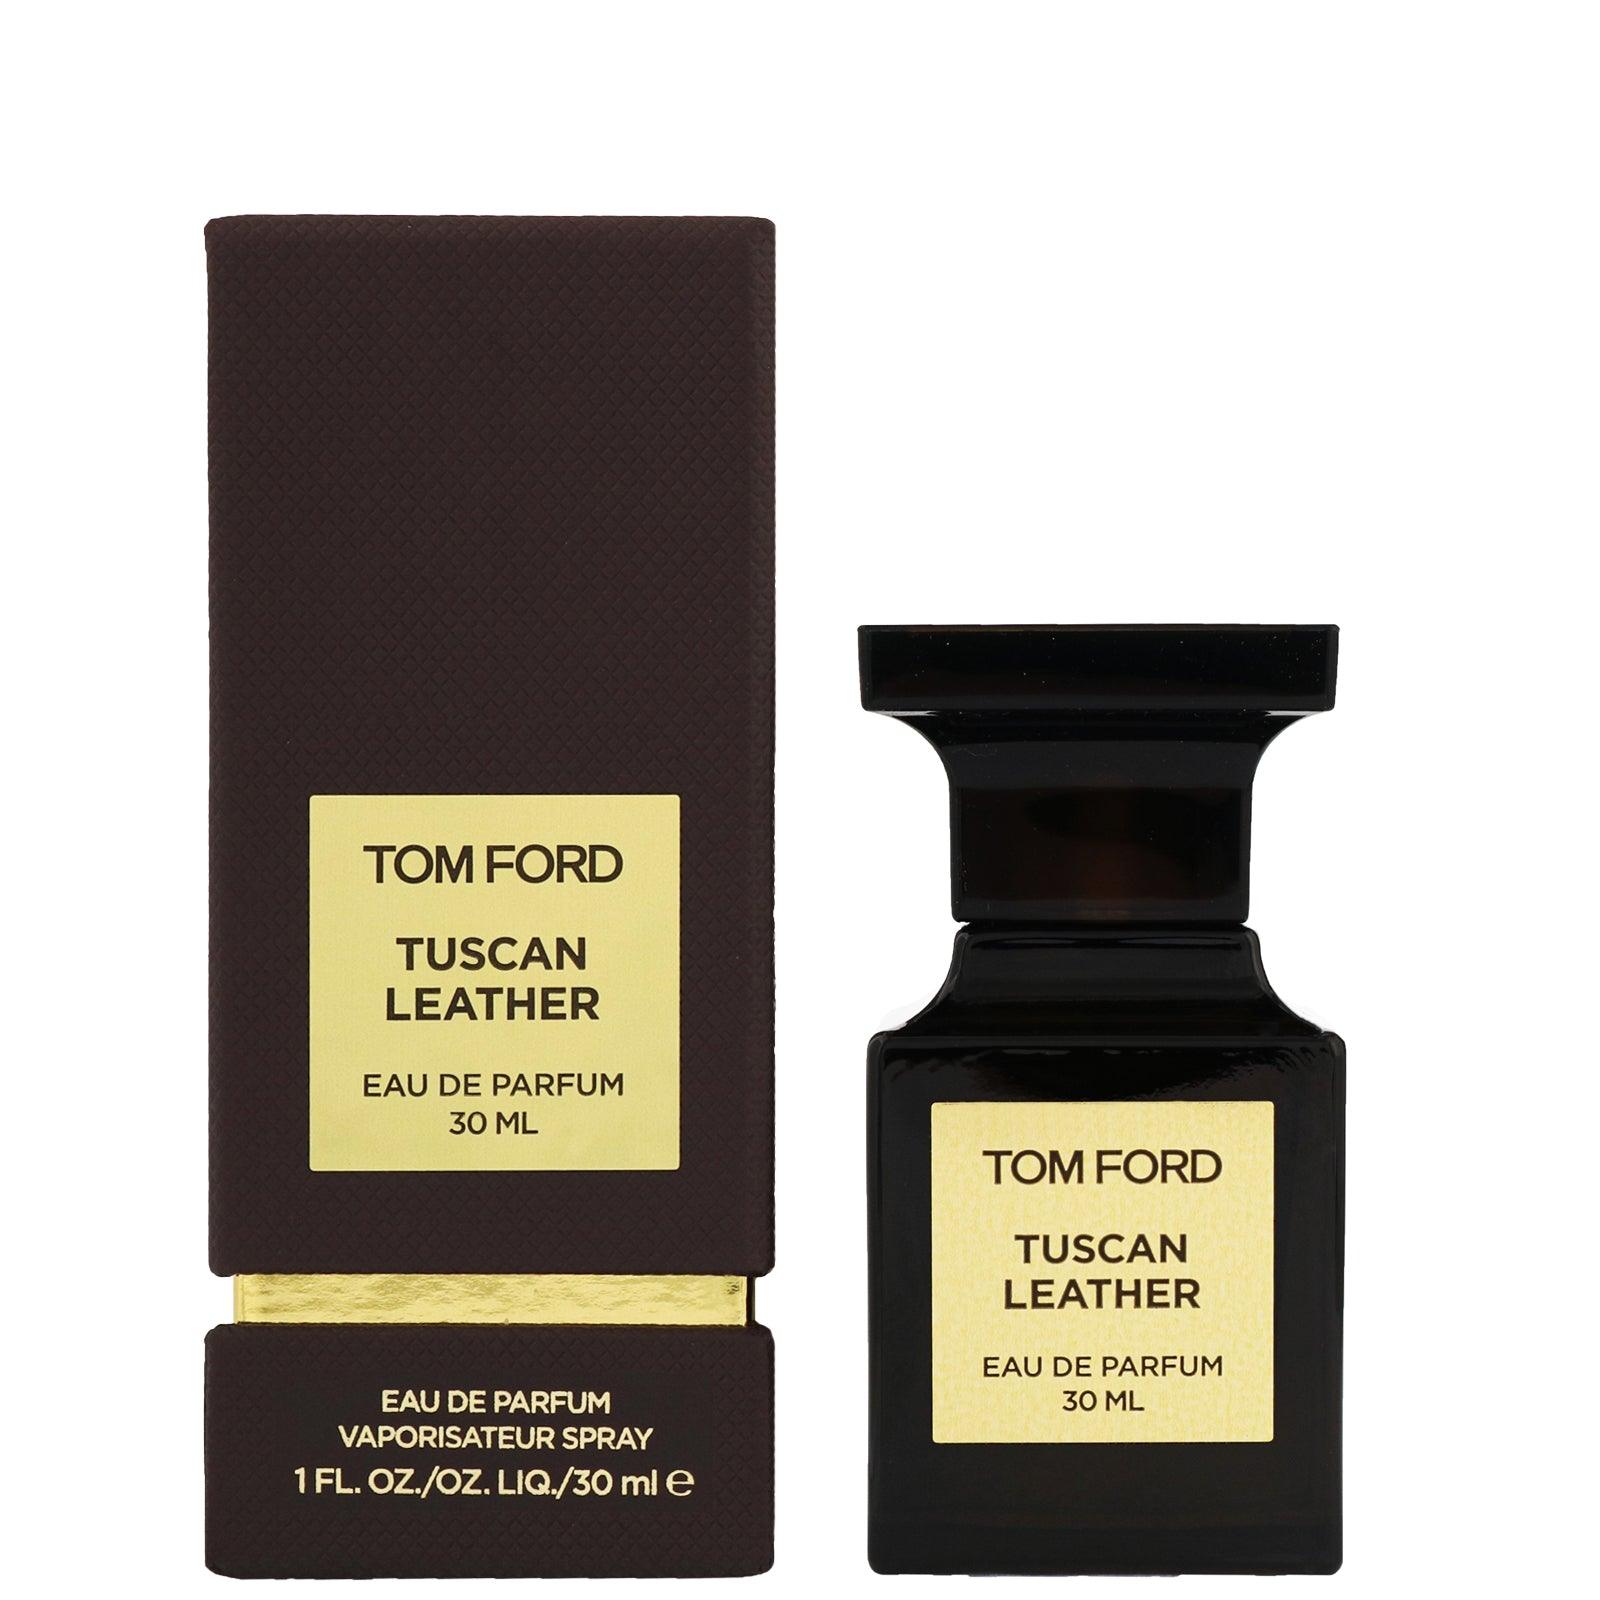 Tom Ford Private Blend Tuscan Leather EDP - Perfume Oasis